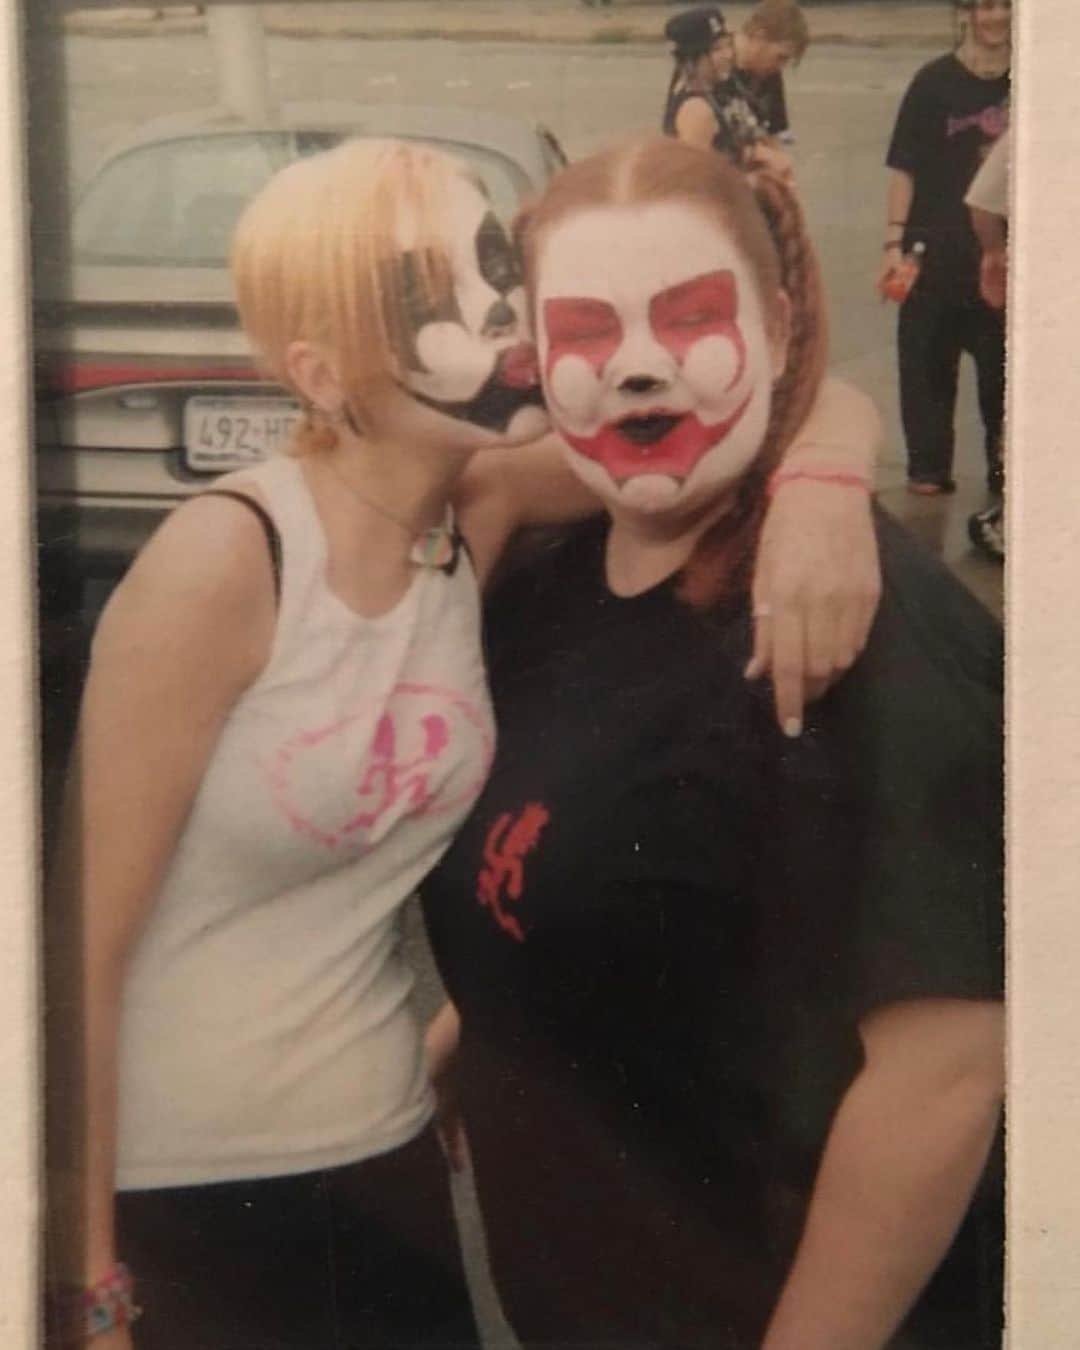 Ashley Smithさんのインスタグラム写真 - (Ashley SmithInstagram)「Yay I can finally talk about  @offrampfilm because we just got our #sagaftrainterimagreement ⭐️ y’all this unhinged, full of love, full of laughs story of two juggalos on their way to the gathering, is finally having its WORLD PREMIERE! 🌎🍿 ~Oct. 28th Poland @splatfilmfest  And then ~ US premier Nov.4th  @neworleansfilmfestival Saturday night 👏🏼👏🏼👏🏼  I grew up in East Texas hanging with Juggalos as a teenager. I was “Down with the clown” as they say. The thing that stood out the most to me amongst the Juggalos was the LOVE, the sense of Family, and of course the FAYGO showers. There’s something so primal about painting one’s face and letting soda rain down from the sky as you bounce to wicked rhymes with your people. The feeling will forever be burned into my memory. So I’m Honored to be able to play Eden in this twisted story of finding love and acceptance in this messed up world.   @damnathan @tim_cairo @bronmoyi @jonnieozz @turnerschofield @therealashsmith @thereeddiamond @miles_doleac @mr_bankens @emmatrancesgrantham @theoduscrane @nedyousef @rhondajohnsondents @thelauracayouette @jeremylondonactor @kateadair_official @fabiolandrade @toora.loora.laura @13friends @dimitrinzerem @attaboiwuzhere @kurttape @tapebarbara @princeable_photography @_chris.wickline_@aidandykes @pile.a.aila @andrew_m_deritter @apexpostproduction @kyotocolor @blaze_heru @no.ell.dominick @tmlaproos @brandonny33 @rickgnelson @jenikakolacz @meg_makeupfx @hsalvaggio @kingbouton @clayton_n_ji @dubdoodle @onthehuntcasting @larrytape @kataleaford @thedimarcopolo @miss.sandyparker @cuppajoe504 @scarboroughdane @warrentape @katenhofstetter @elise.tate @amywaksmonski @nitrotheflash @savantcarlos @virg. _of_ tears @alex_kissel @kennedyremotes @majic_sean @evan_eastham @ooooooowen @joebrandtmedia @roansmithdesigns @theinkwellpress @flo_resolution @jimmythehairguy @realmankini @faygoluversheaven @rageedyann」10月11日 11時49分 - therealashsmith